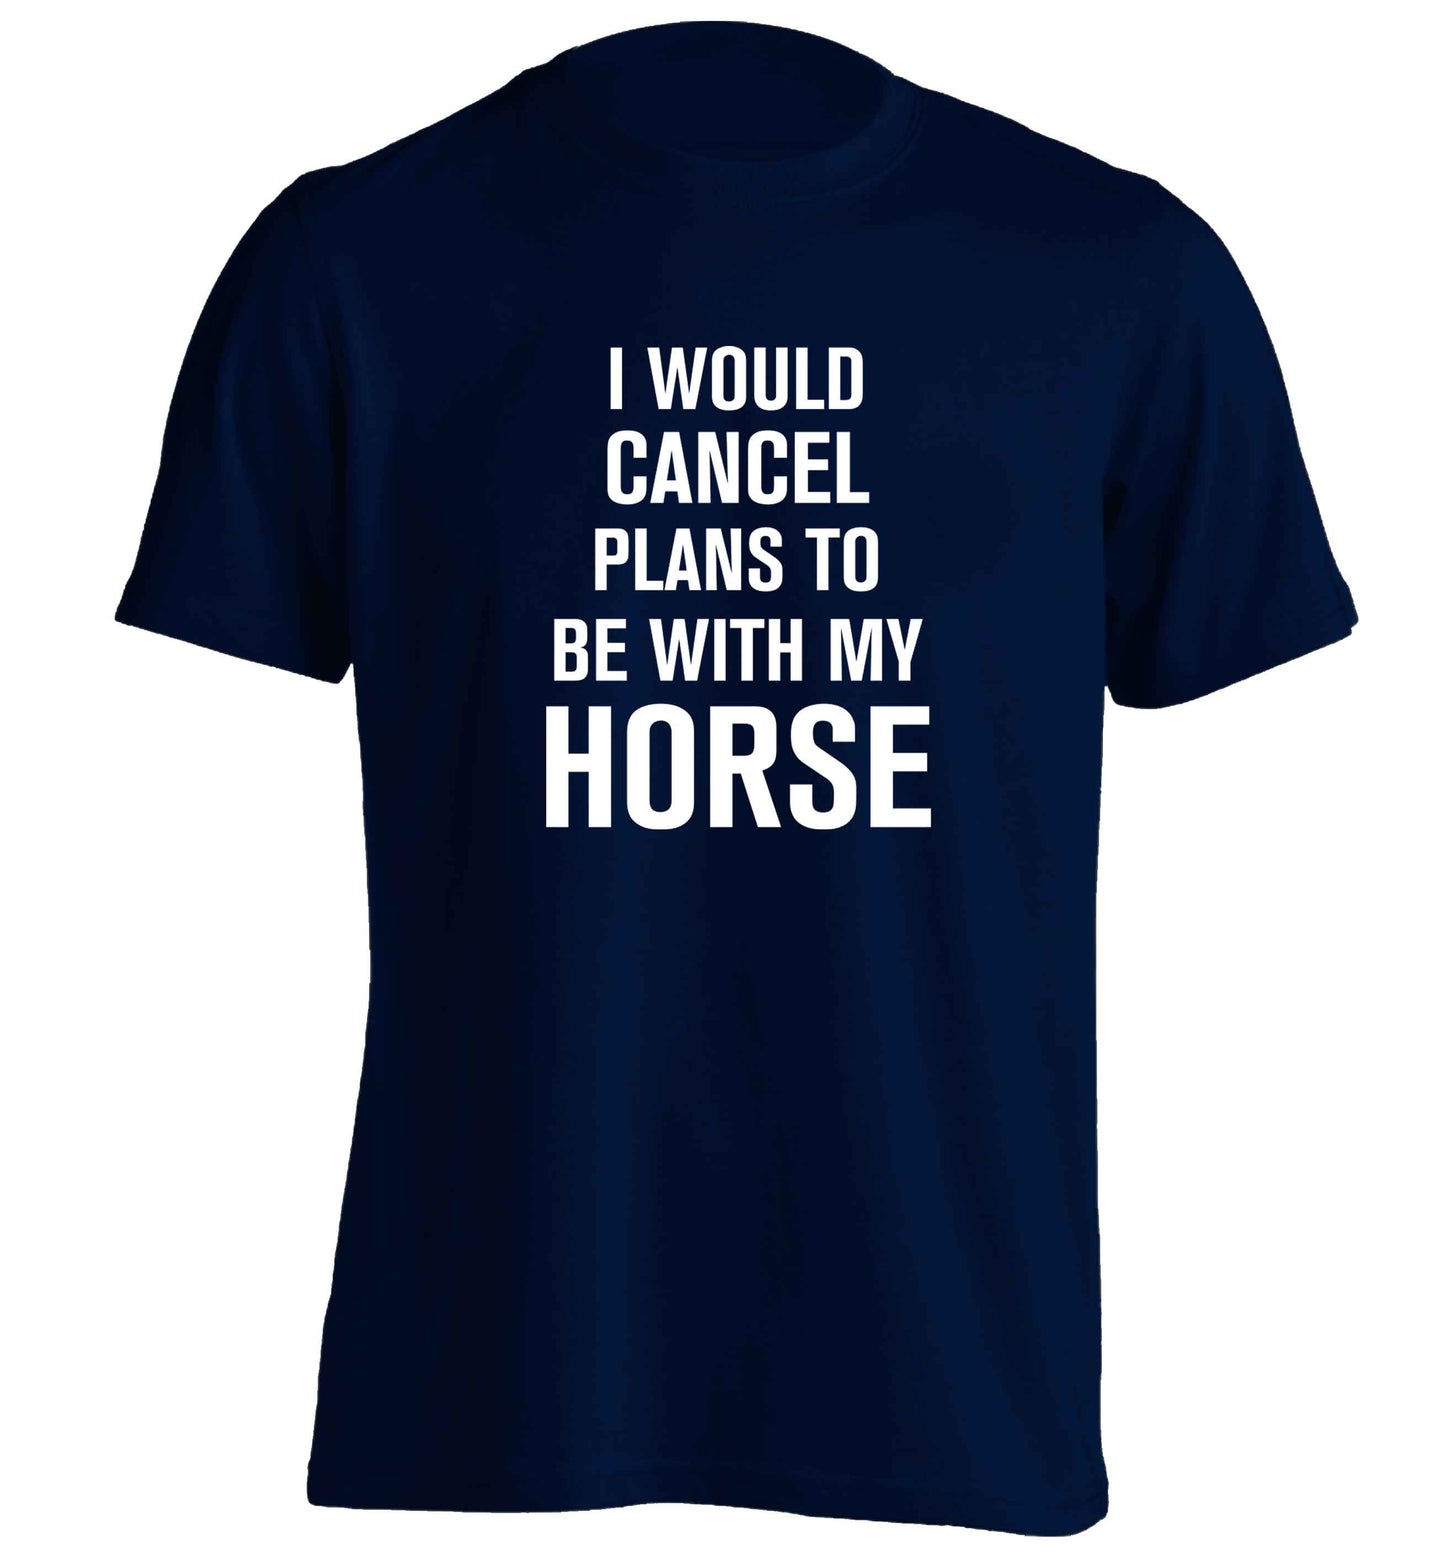 I will cancel plans to be with my horse adults unisex navy Tshirt 2XL